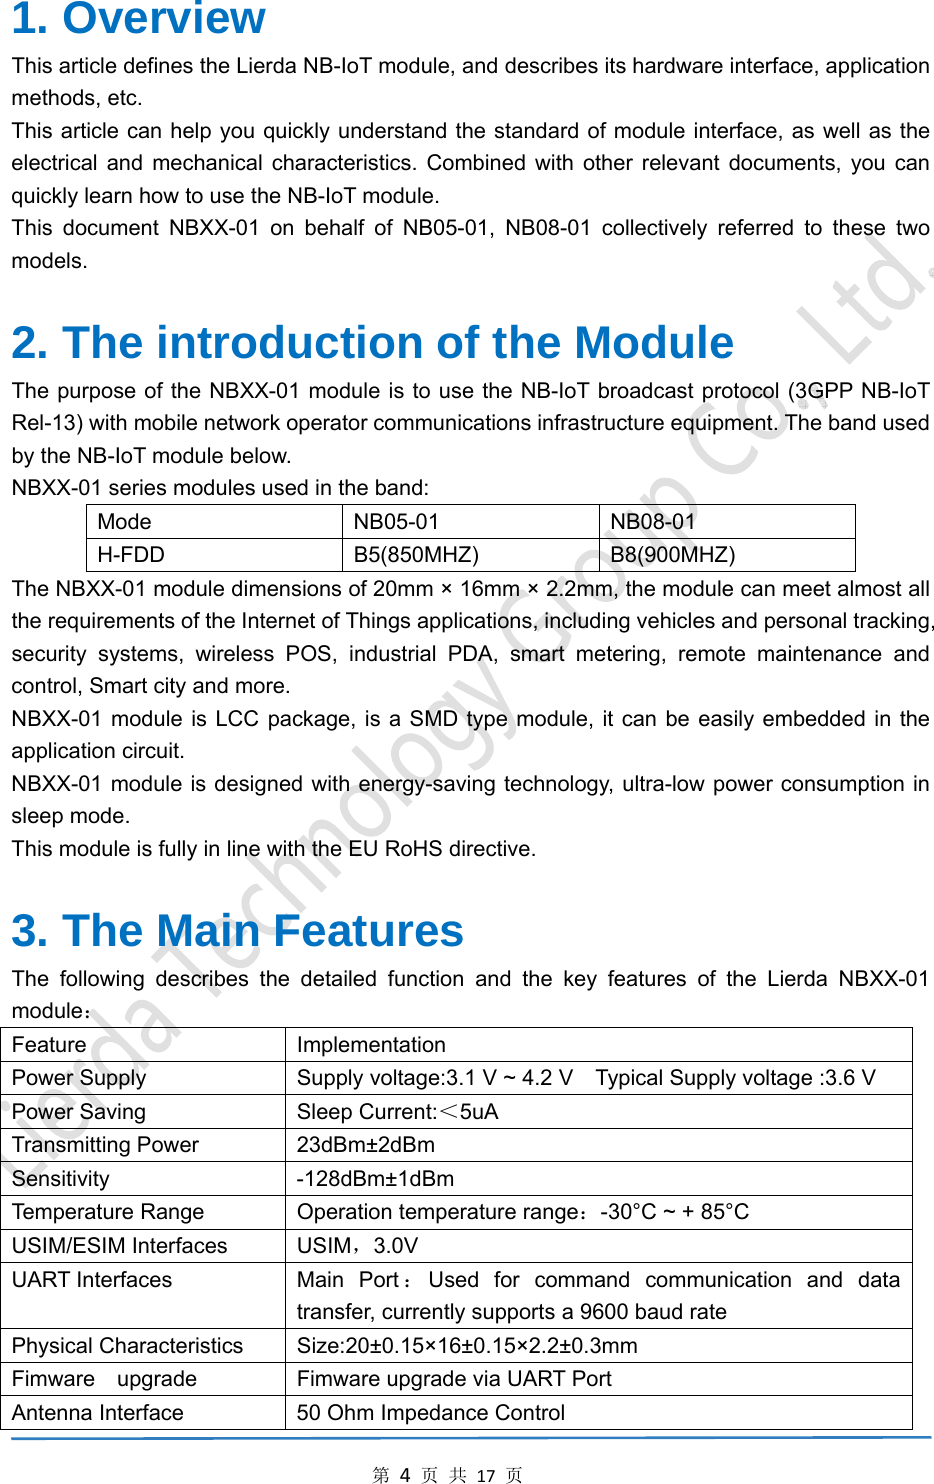 第4页共17页1. Overview   This article defines the Lierda NB-IoT module, and describes its hardware interface, application methods, etc. This article can help you quickly understand the standard of module interface, as well as the electrical and mechanical characteristics. Combined with other relevant documents, you can quickly learn how to use the NB-IoT module. This document NBXX-01 on behalf of NB05-01, NB08-01 collectively referred to these two models.  2. The introduction of the Module The purpose of the NBXX-01 module is to use the NB-IoT broadcast protocol (3GPP NB-IoT Rel-13) with mobile network operator communications infrastructure equipment. The band used by the NB-IoT module below. NBXX-01 series modules used in the band: Mode NB05-01 NB08-01 H-FDD B5(850MHZ) B8(900MHZ) The NBXX-01 module dimensions of 20mm × 16mm × 2.2mm, the module can meet almost all the requirements of the Internet of Things applications, including vehicles and personal tracking, security systems, wireless POS, industrial PDA, smart metering, remote maintenance and control, Smart city and more. NBXX-01 module is LCC package, is a SMD type module, it can be easily embedded in the application circuit. NBXX-01 module is designed with energy-saving technology, ultra-low power consumption in sleep mode. This module is fully in line with the EU RoHS directive.  3. The Main Features The following describes the detailed function and the key features of the Lierda NBXX-01 module： Feature Implementation Power Supply    Supply voltage:3.1 V ~ 4.2 V    Typical Supply voltage :3.6 V   Power Saving  Sleep Current:＜5uA Transmitting Power  23dBm±2dBm Sensitivity   -128dBm±1dBm Temperature Range  Operation temperature range：-30°C ~ + 85°C USIM/ESIM Interfaces  USIM，3.0V UART Interfaces  Main Port ：Used for command communication and data transfer, currently supports a 9600 baud rate Physical Characteristics  Size:20±0.15×16±0.15×2.2±0.3mm Fimware    upgrade  Fimware upgrade via UART Port Antenna Interface  50 Ohm Impedance Control 